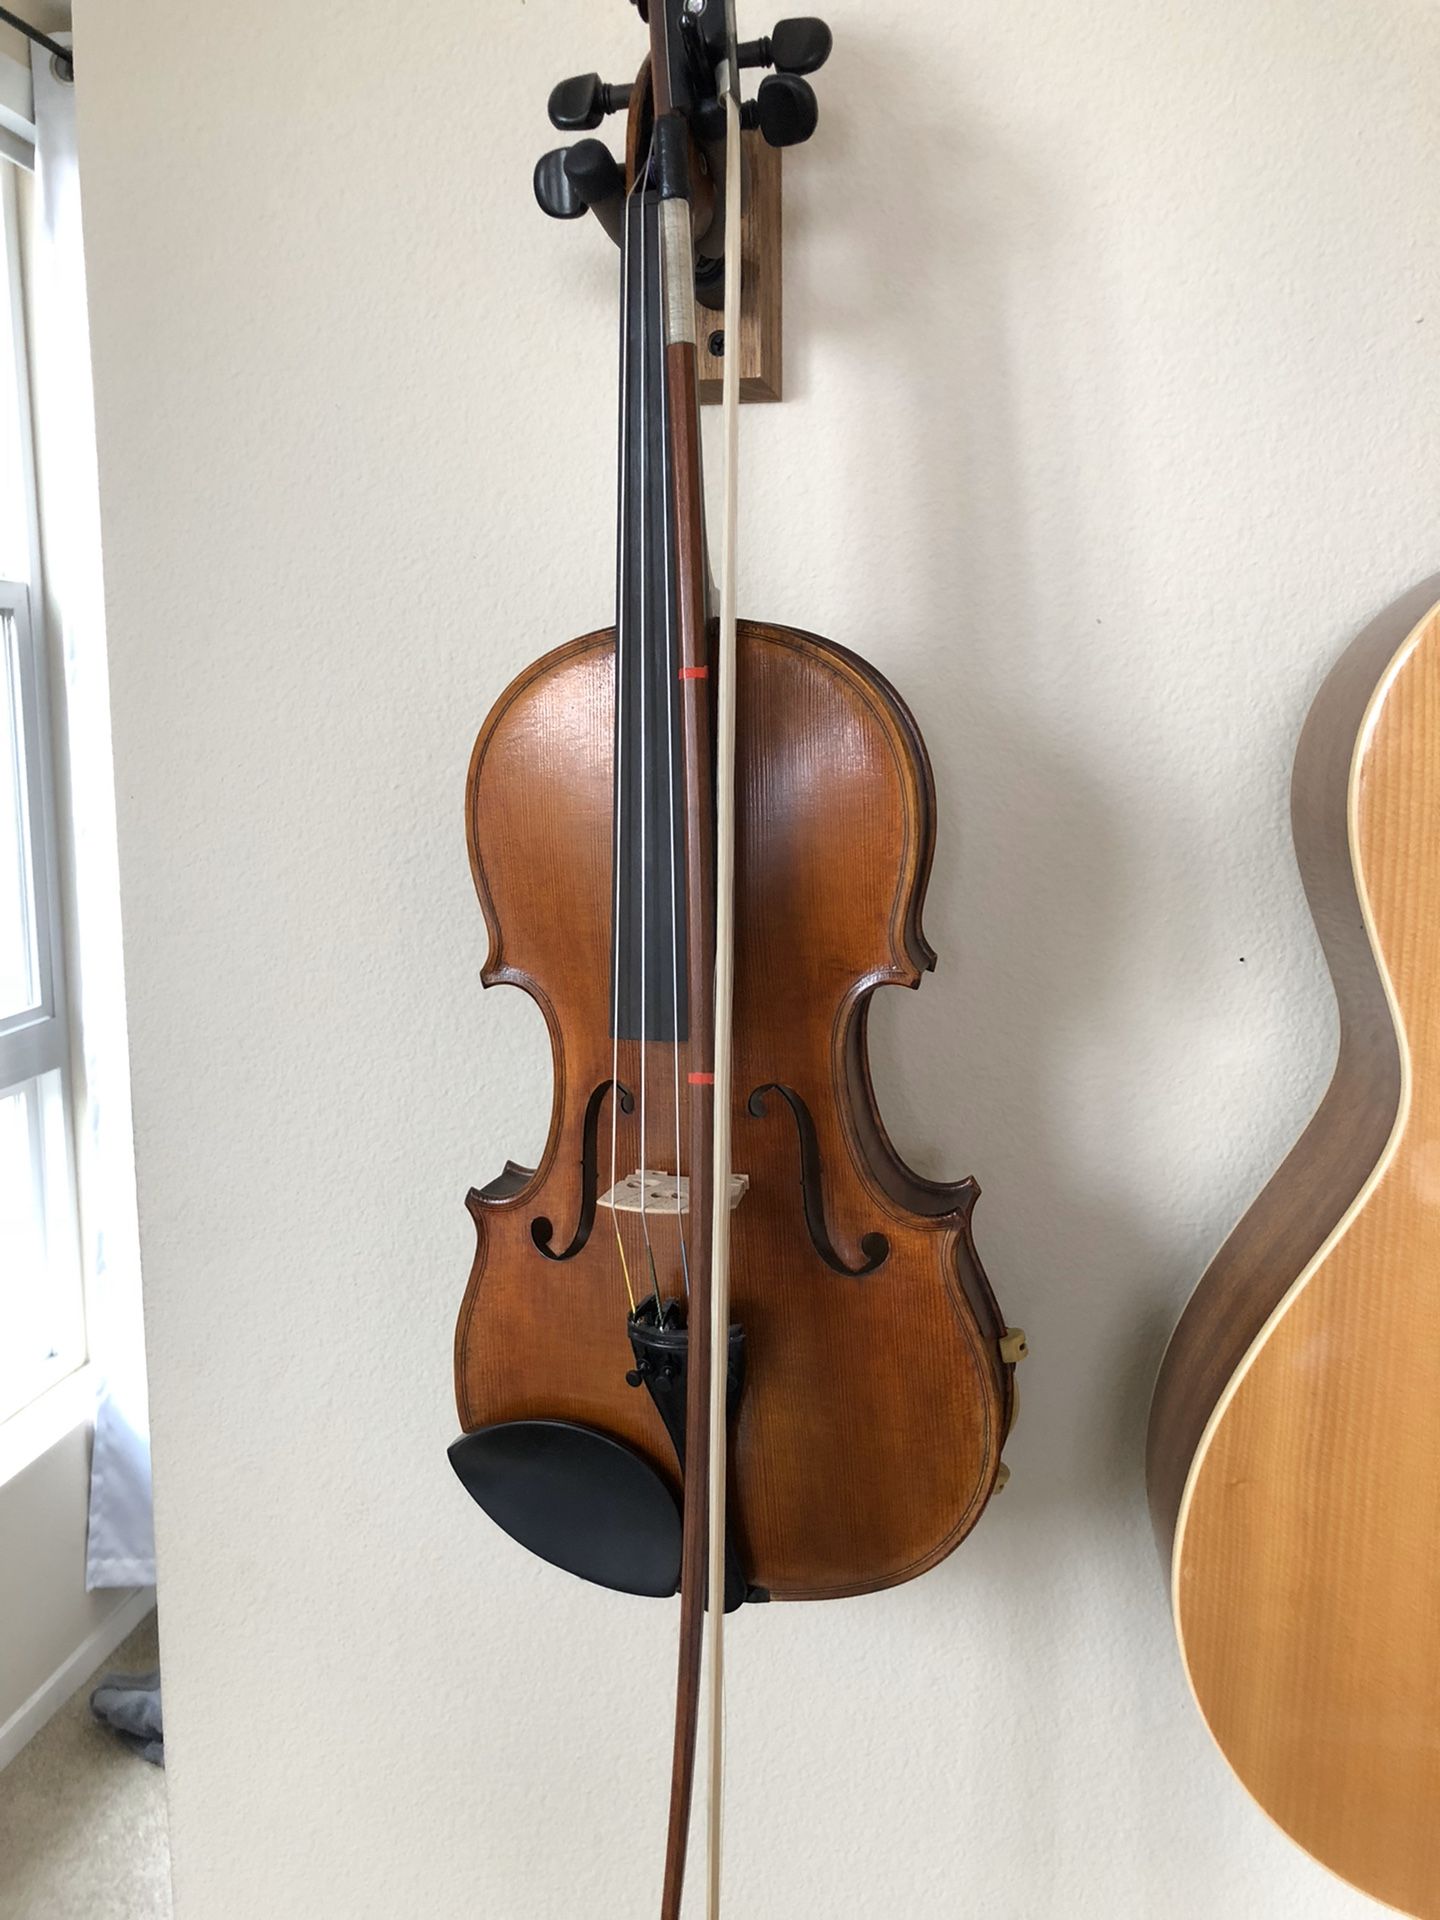 Doetsch 4/4 violin with bow, rest, practice mute and case!